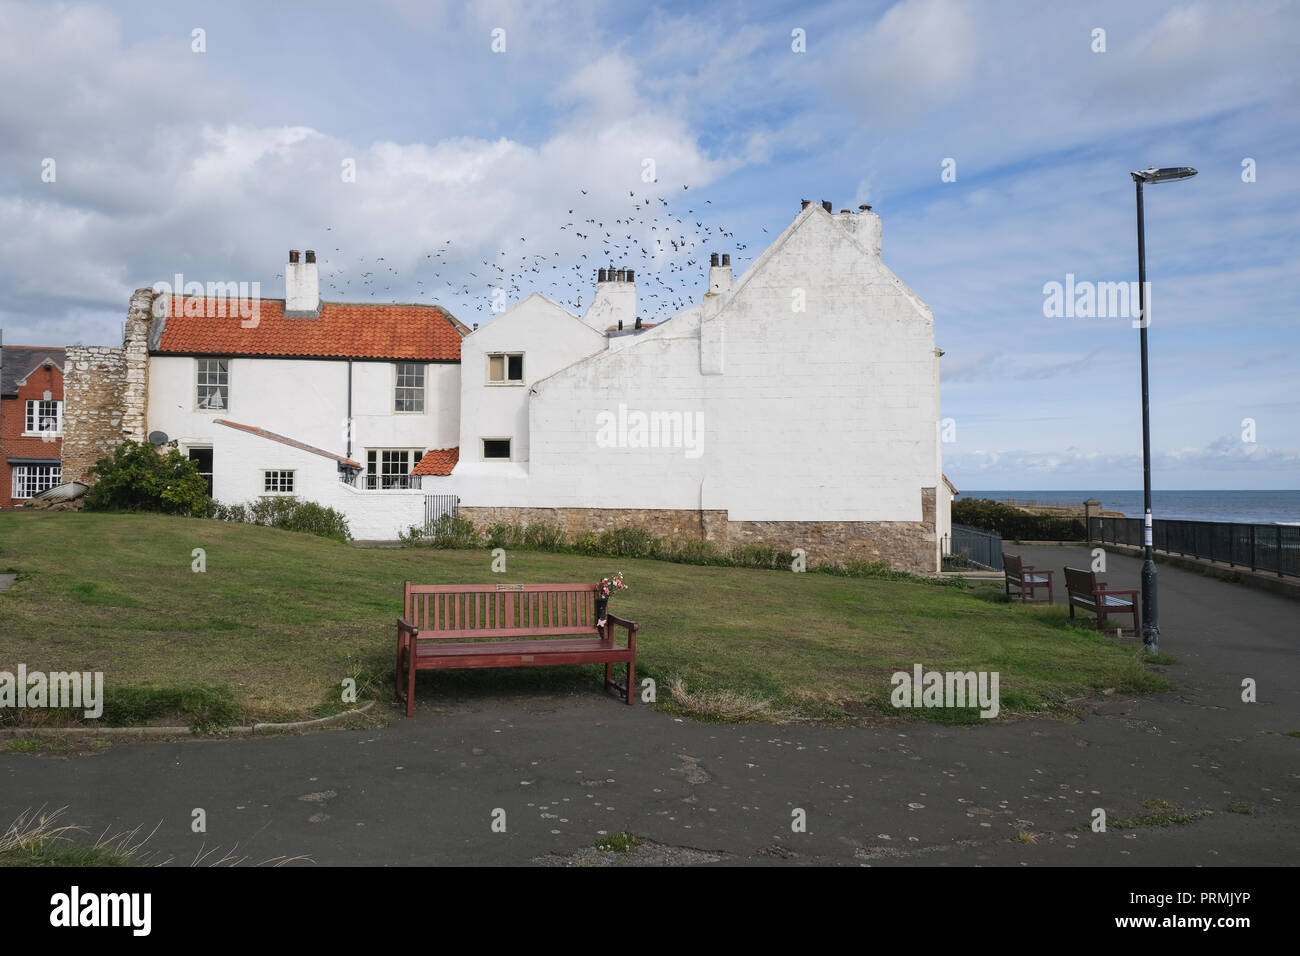 Cliff House Cullercoats North Shields, Tyne et Wear coast Banque D'Images